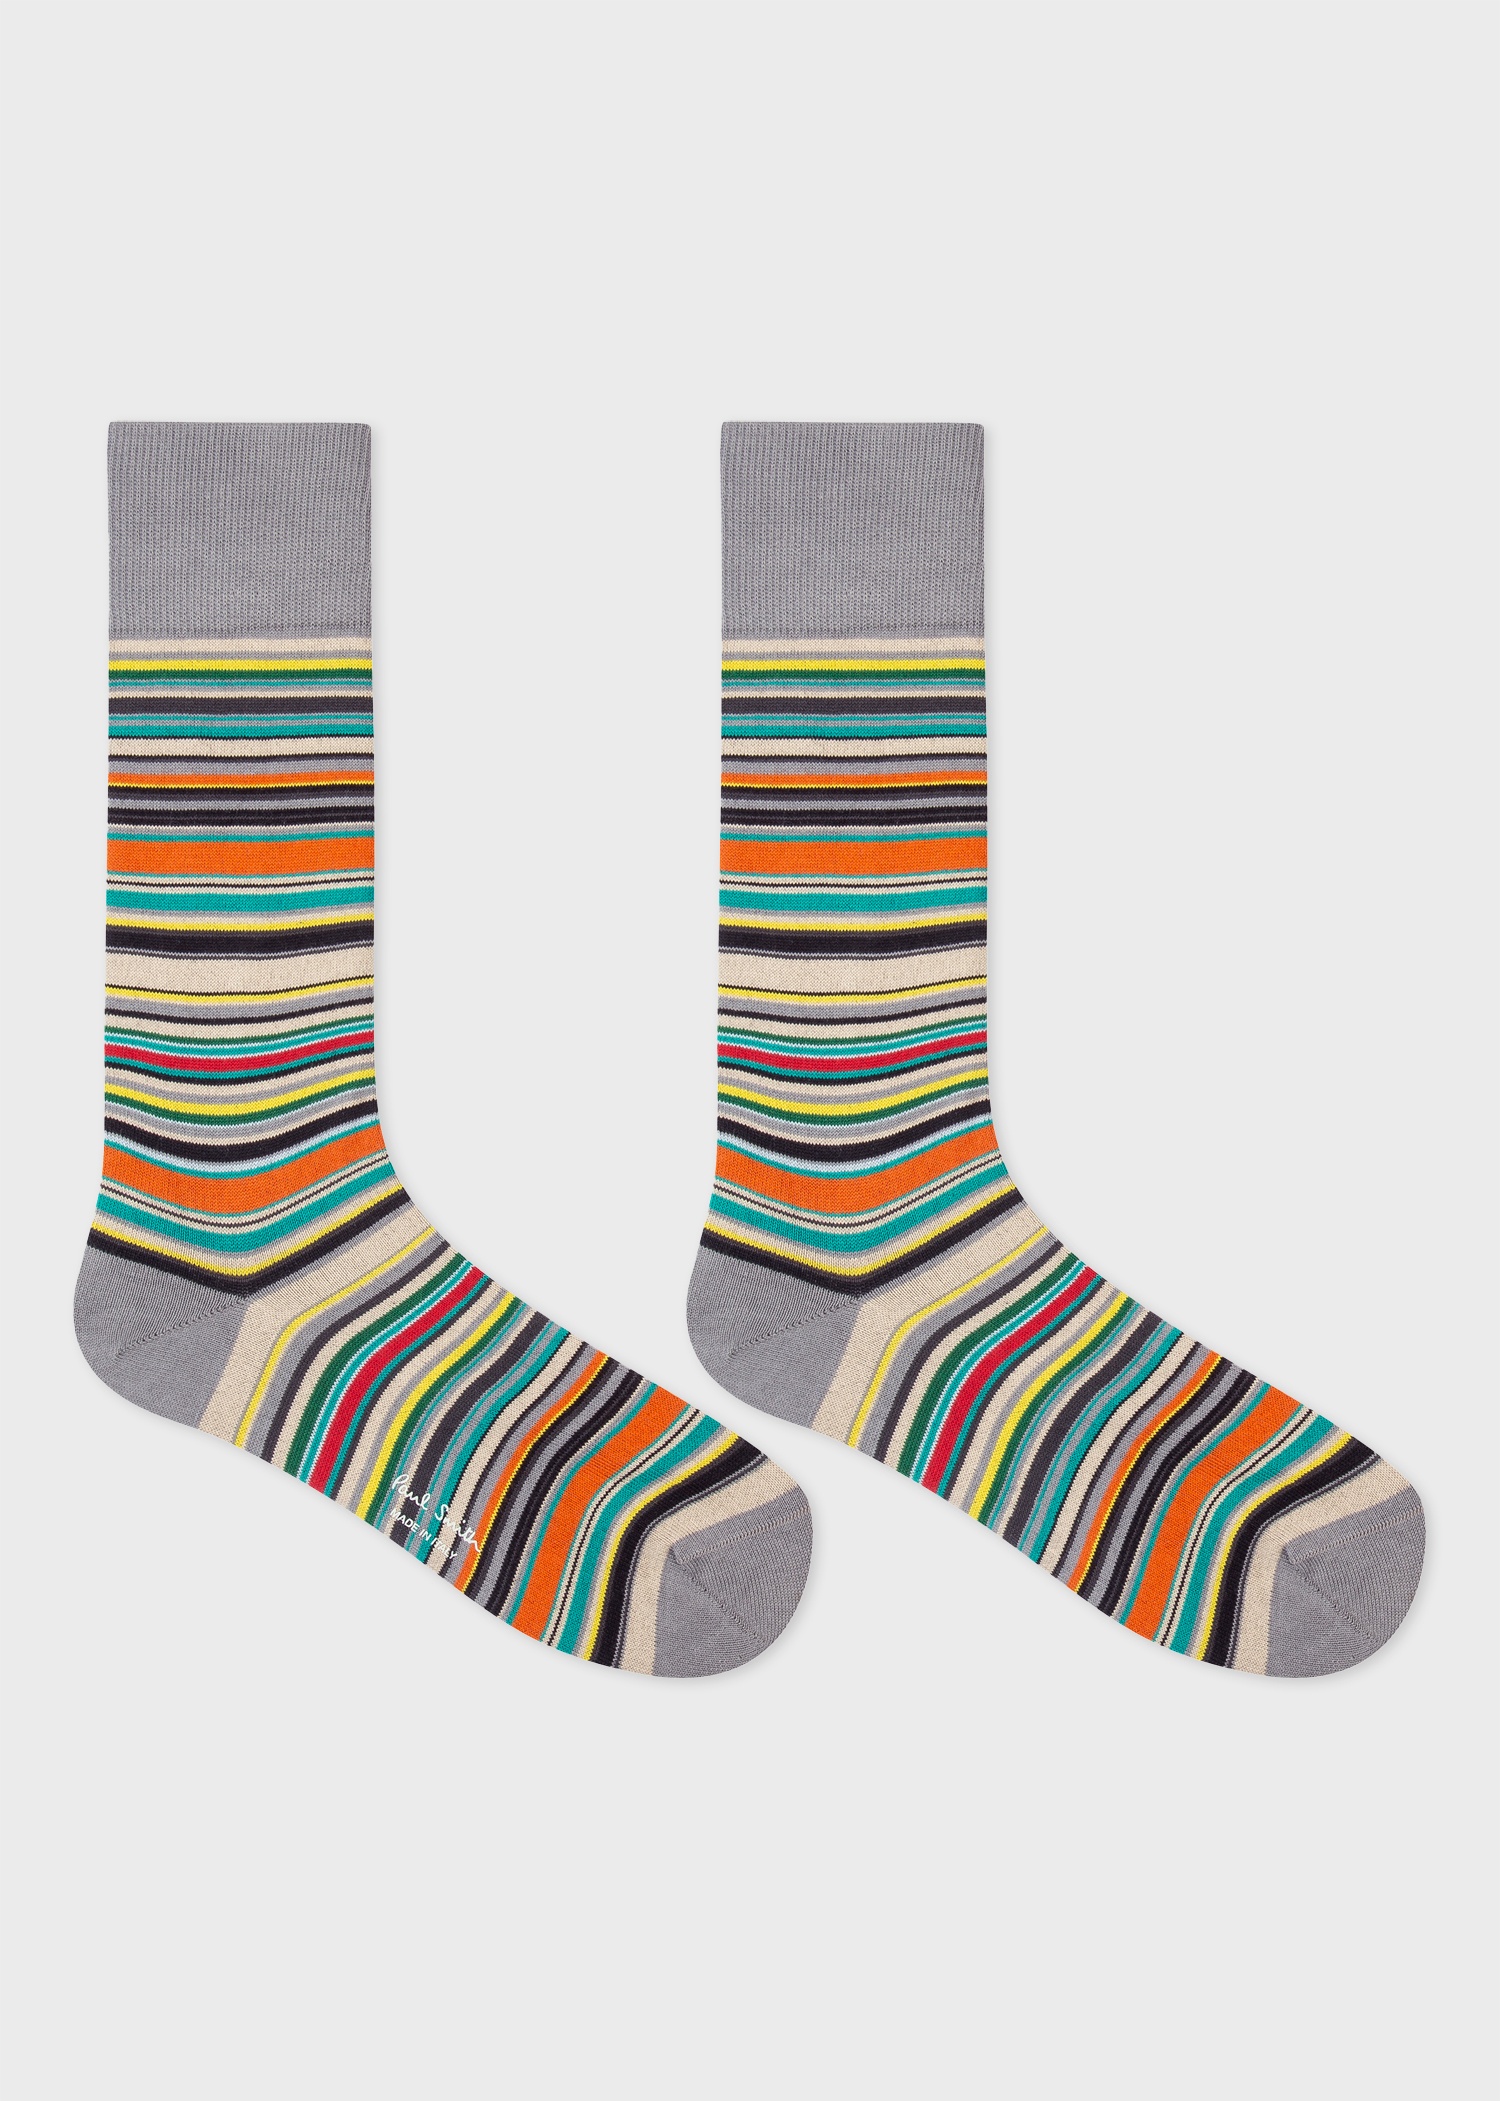 Navy And Grey 'Signature Stripe' Socks Two Pack - 3